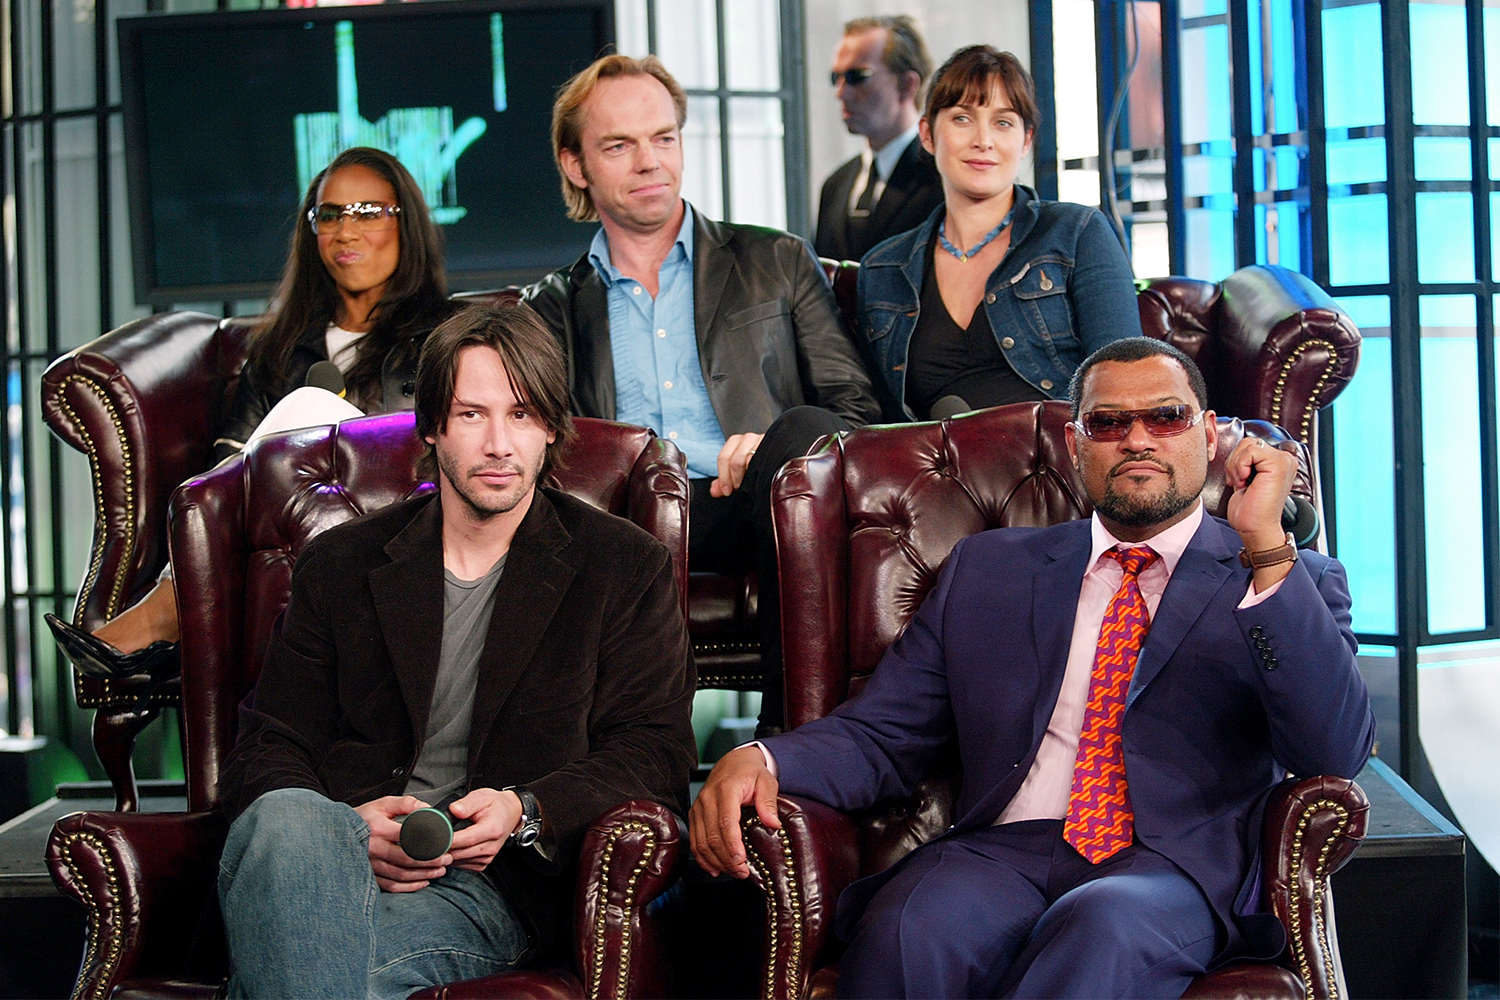 Jada Pinkett Smith, Hugo Weaving, Carrie-Anne Moss, Keanu Reeves and Laurence Fishburne during a visit from the cast of "The Matrix Reloaded" on MTV's Total Request Live